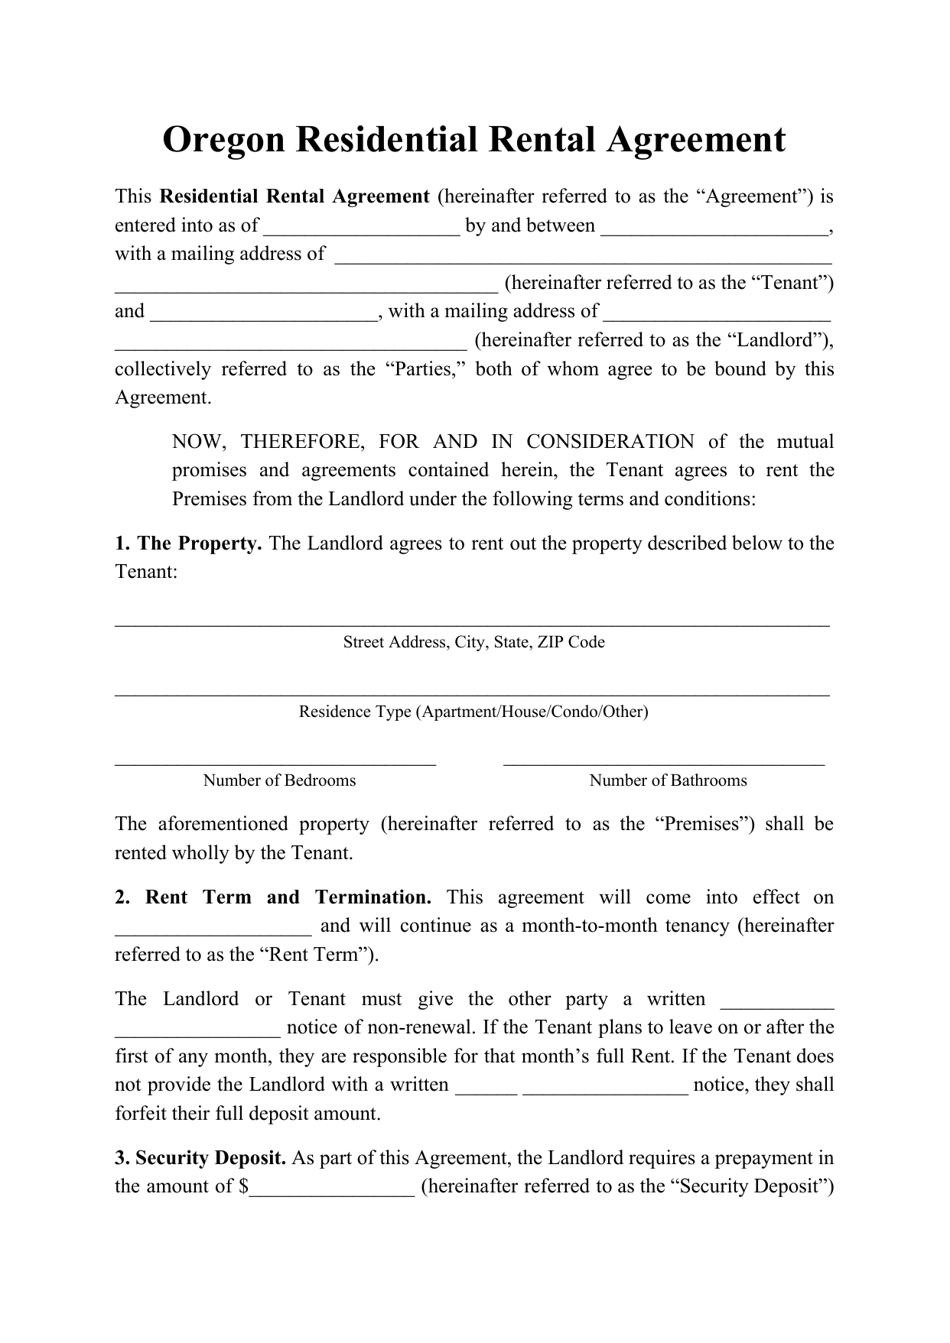 Oregon Residential Rental Agreement Template Fill Out, Sign Online